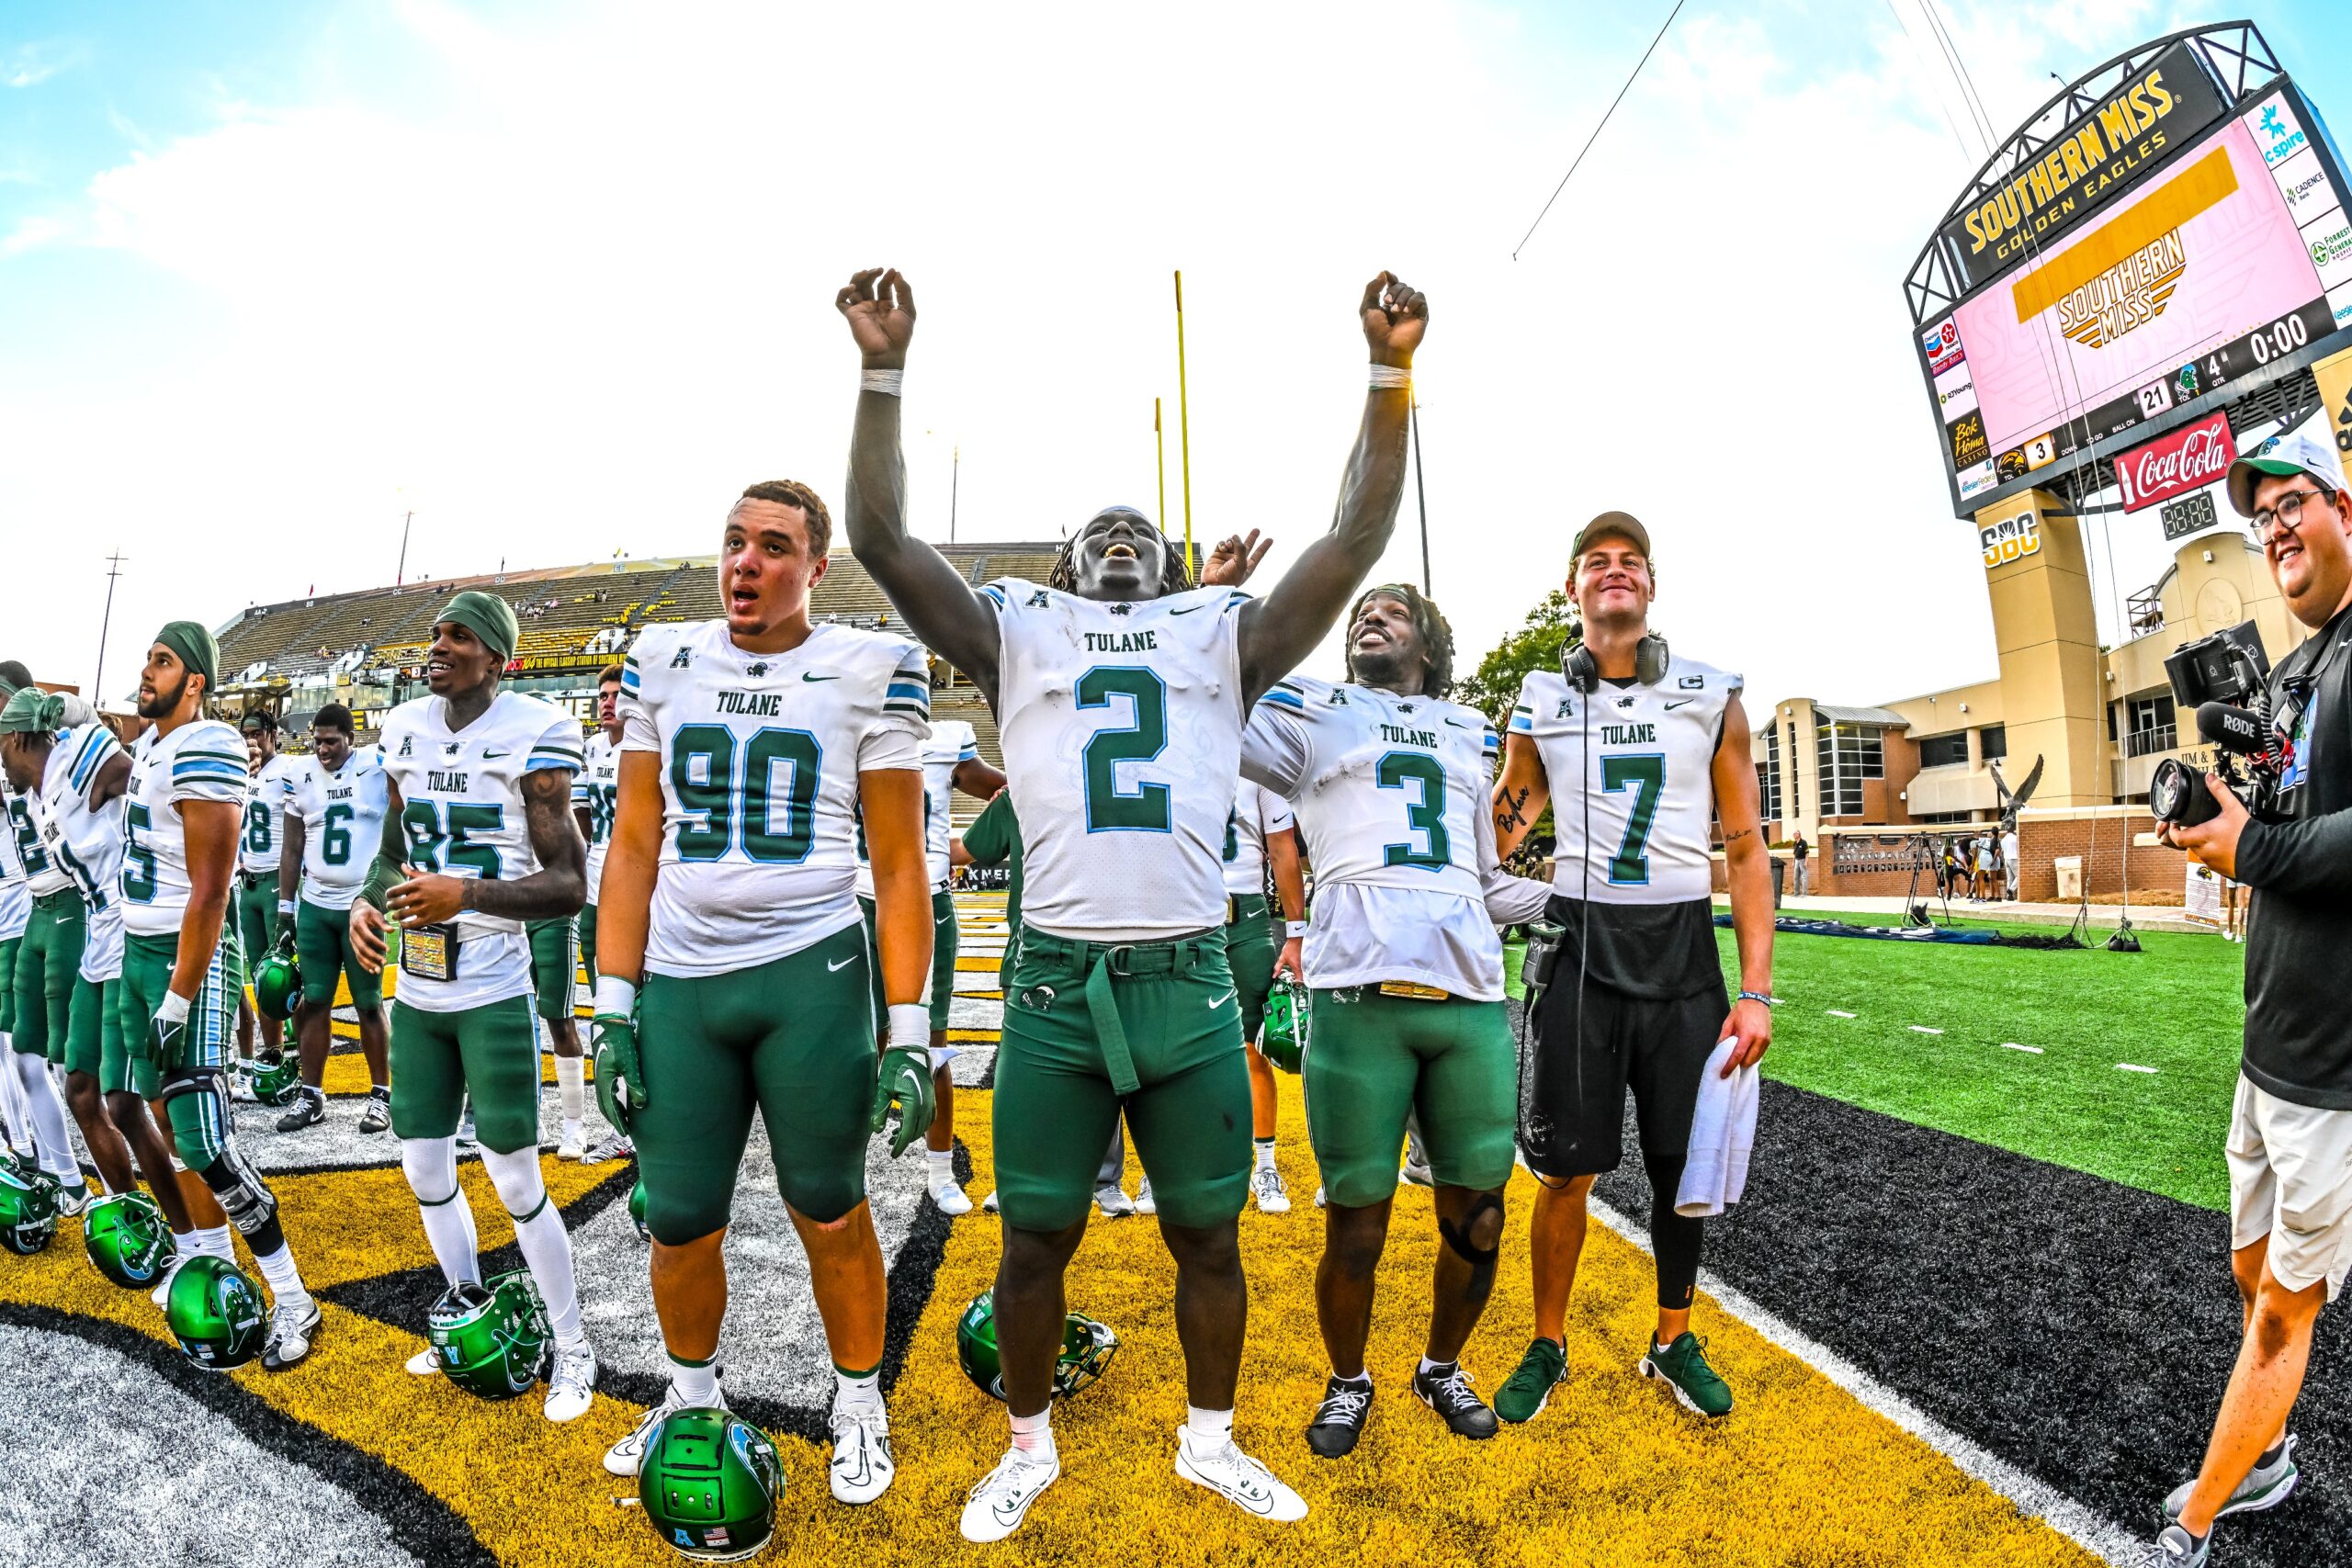 Tulane celebrates the win at Southern Miss